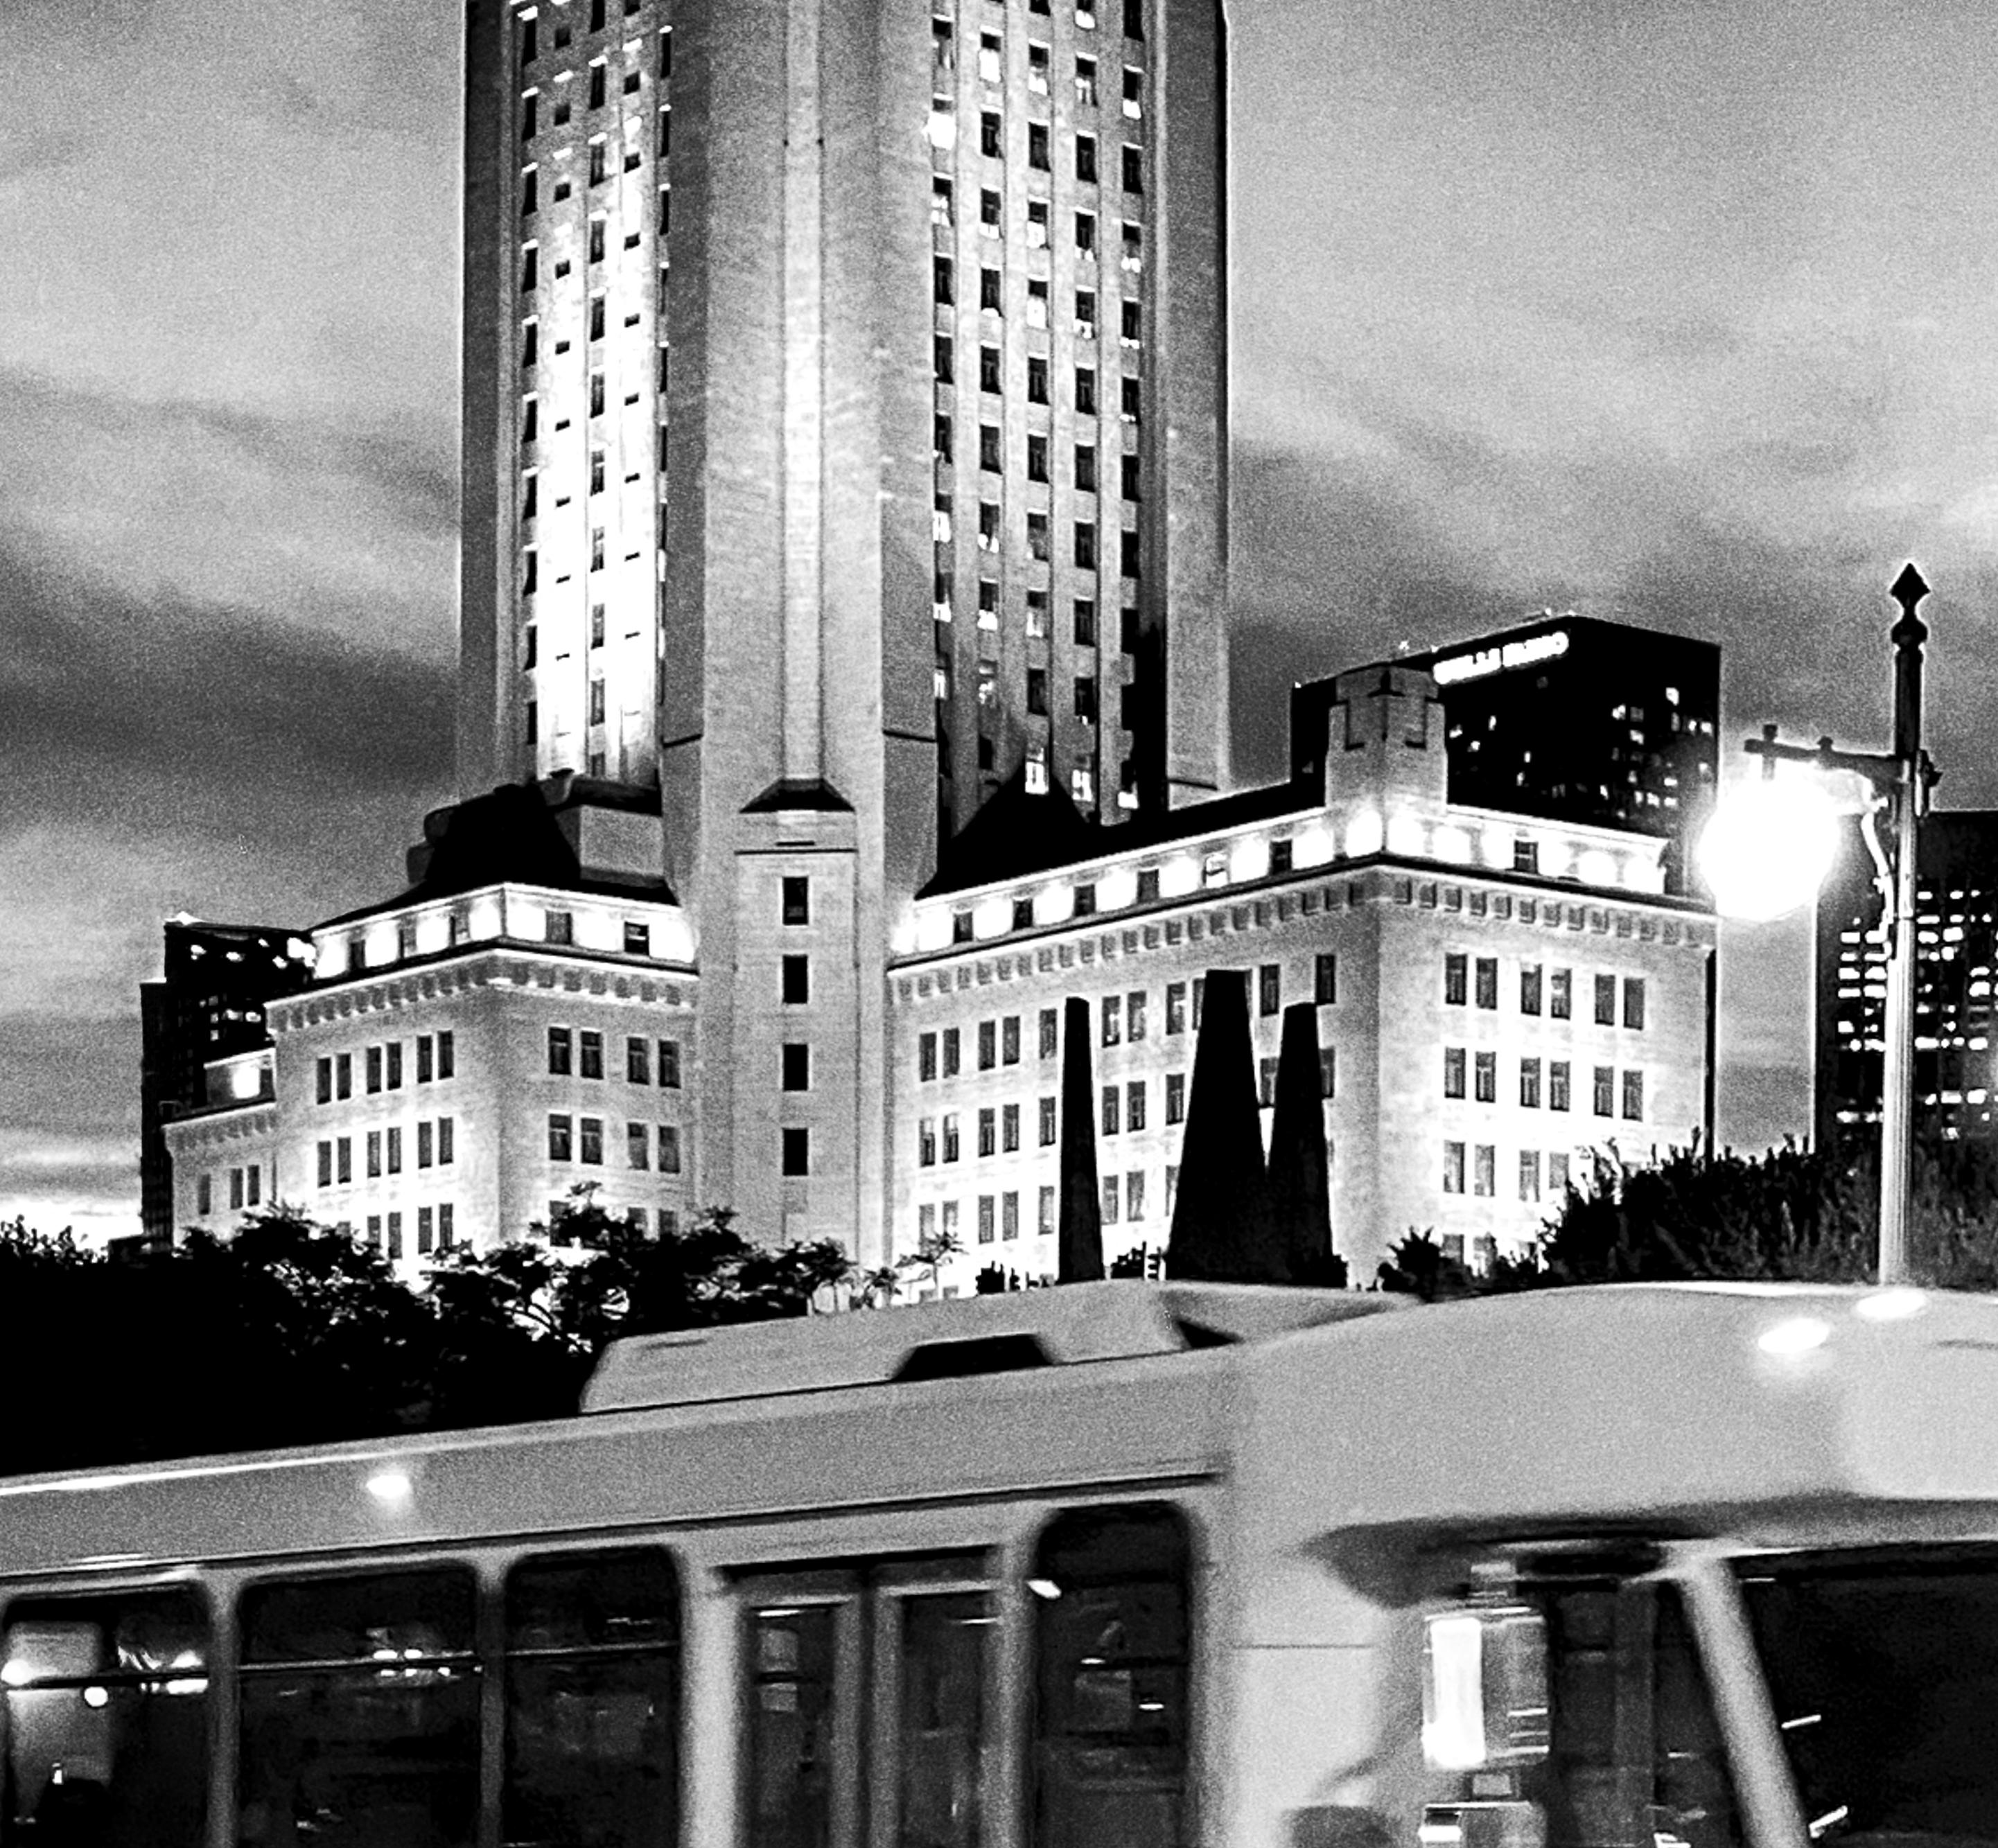 Black and white urban landscape. The photograph is taken in Downtown, Los Angeles.

Original gallery quality archival pigment print on archival paper signed by the artist.
Limited edition of 6
Paper size: 18